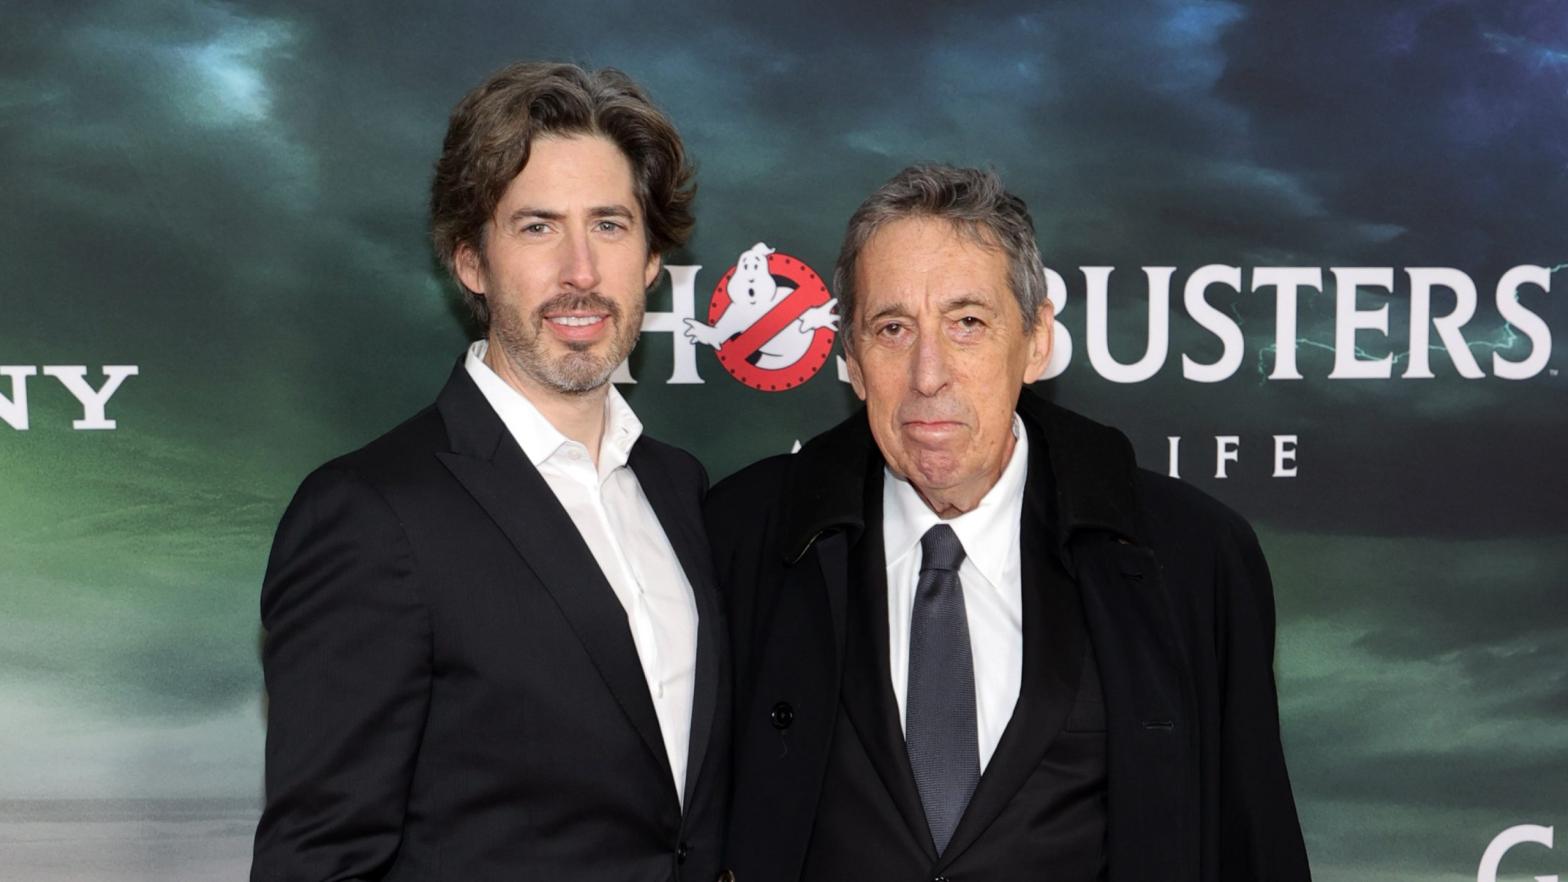 Jason (left) and Ivan Reitman (right) at the Ghostbusters: Afterlife premiere in New York City on November 15, 2021. (Photo: Mike Coppola, Getty Images)